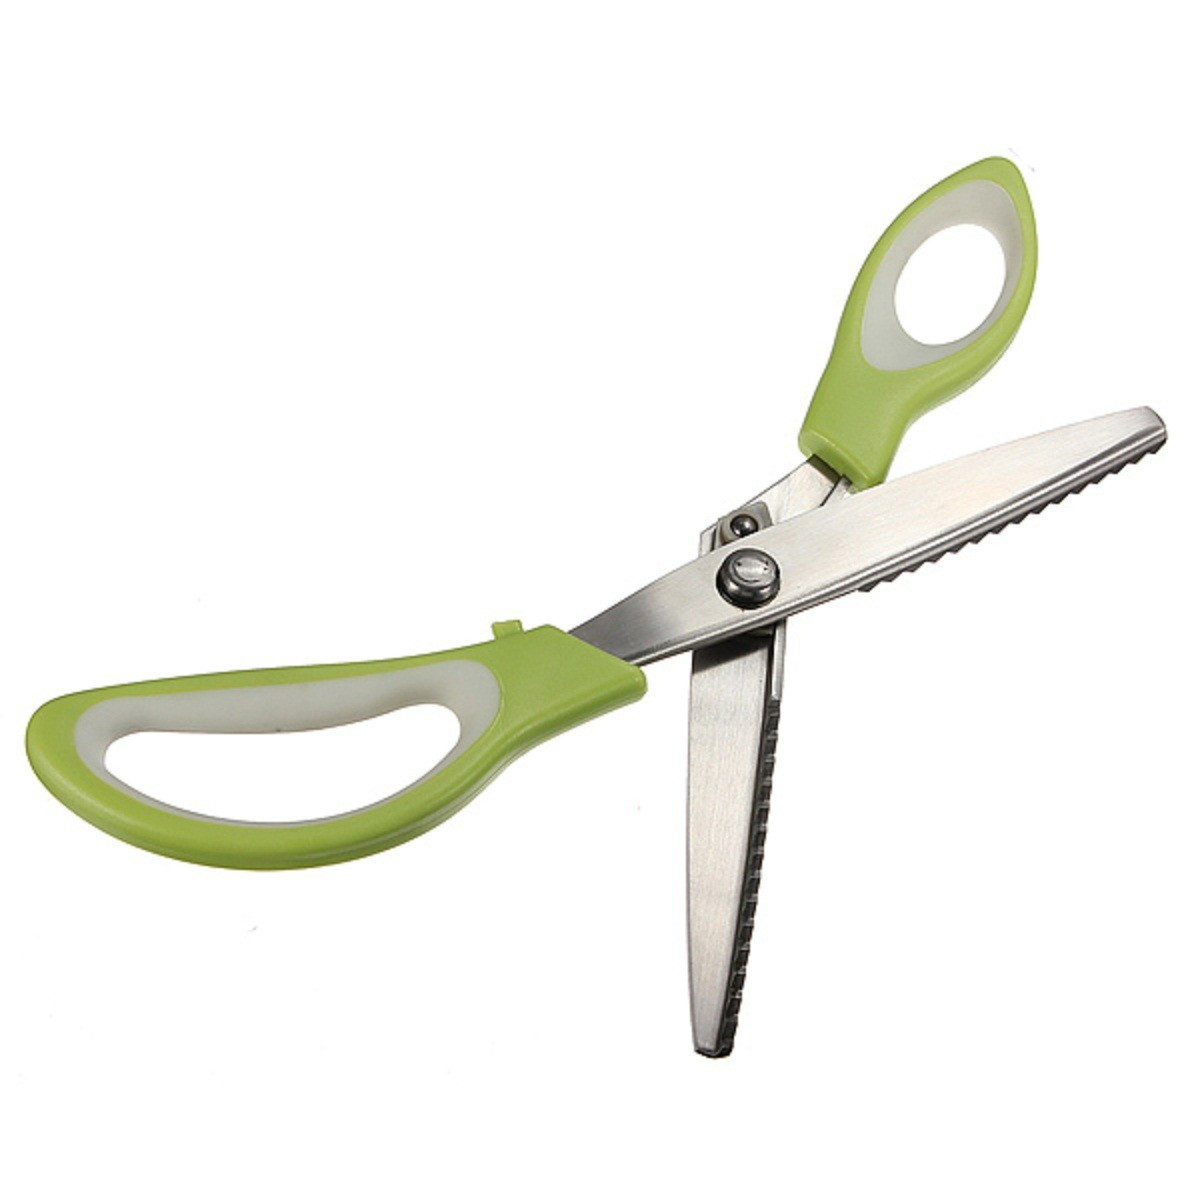 Find Professional Stainless Steel Pinking Shear Tailor Sew Cloth Making Scissors Tool for Sale on Gipsybee.com with cryptocurrencies